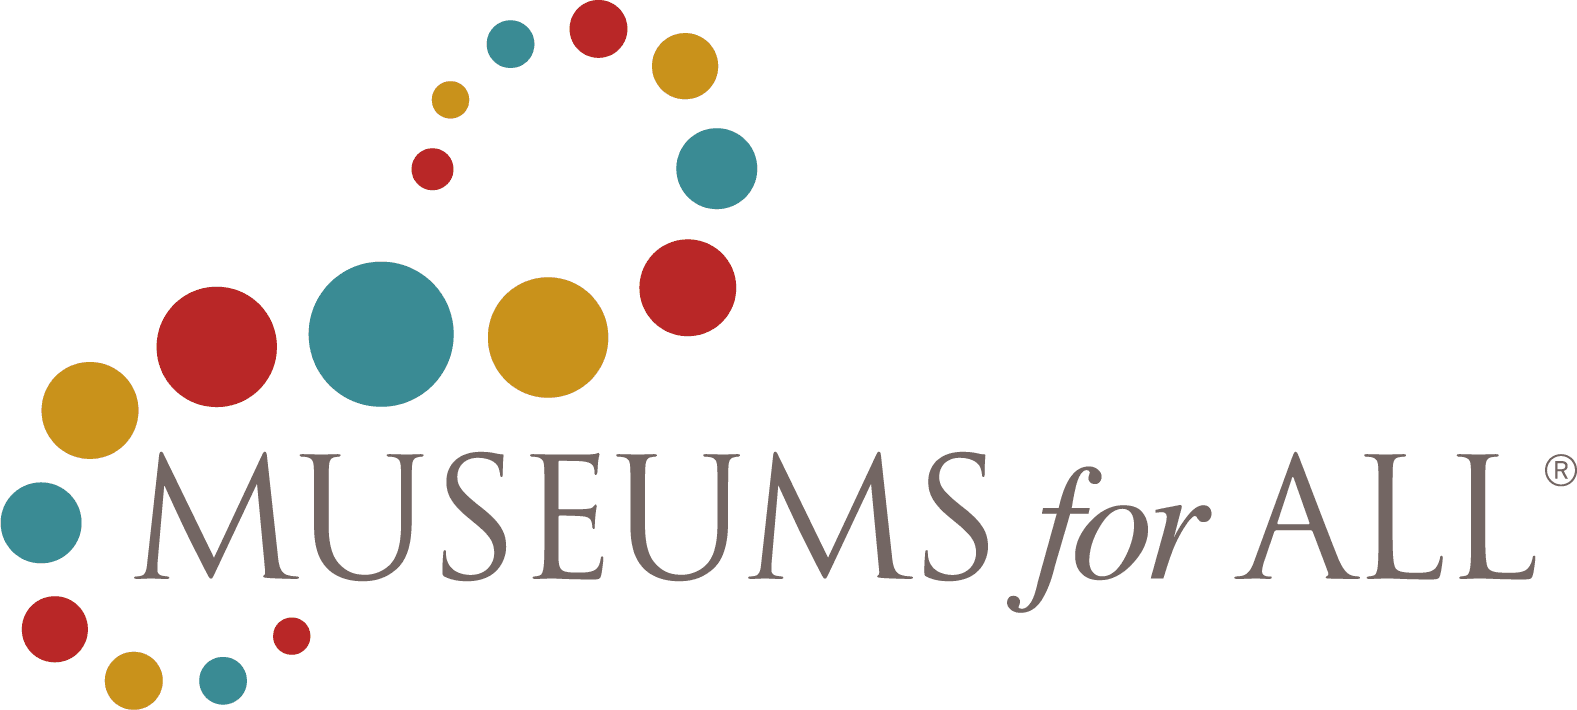 Museums For All